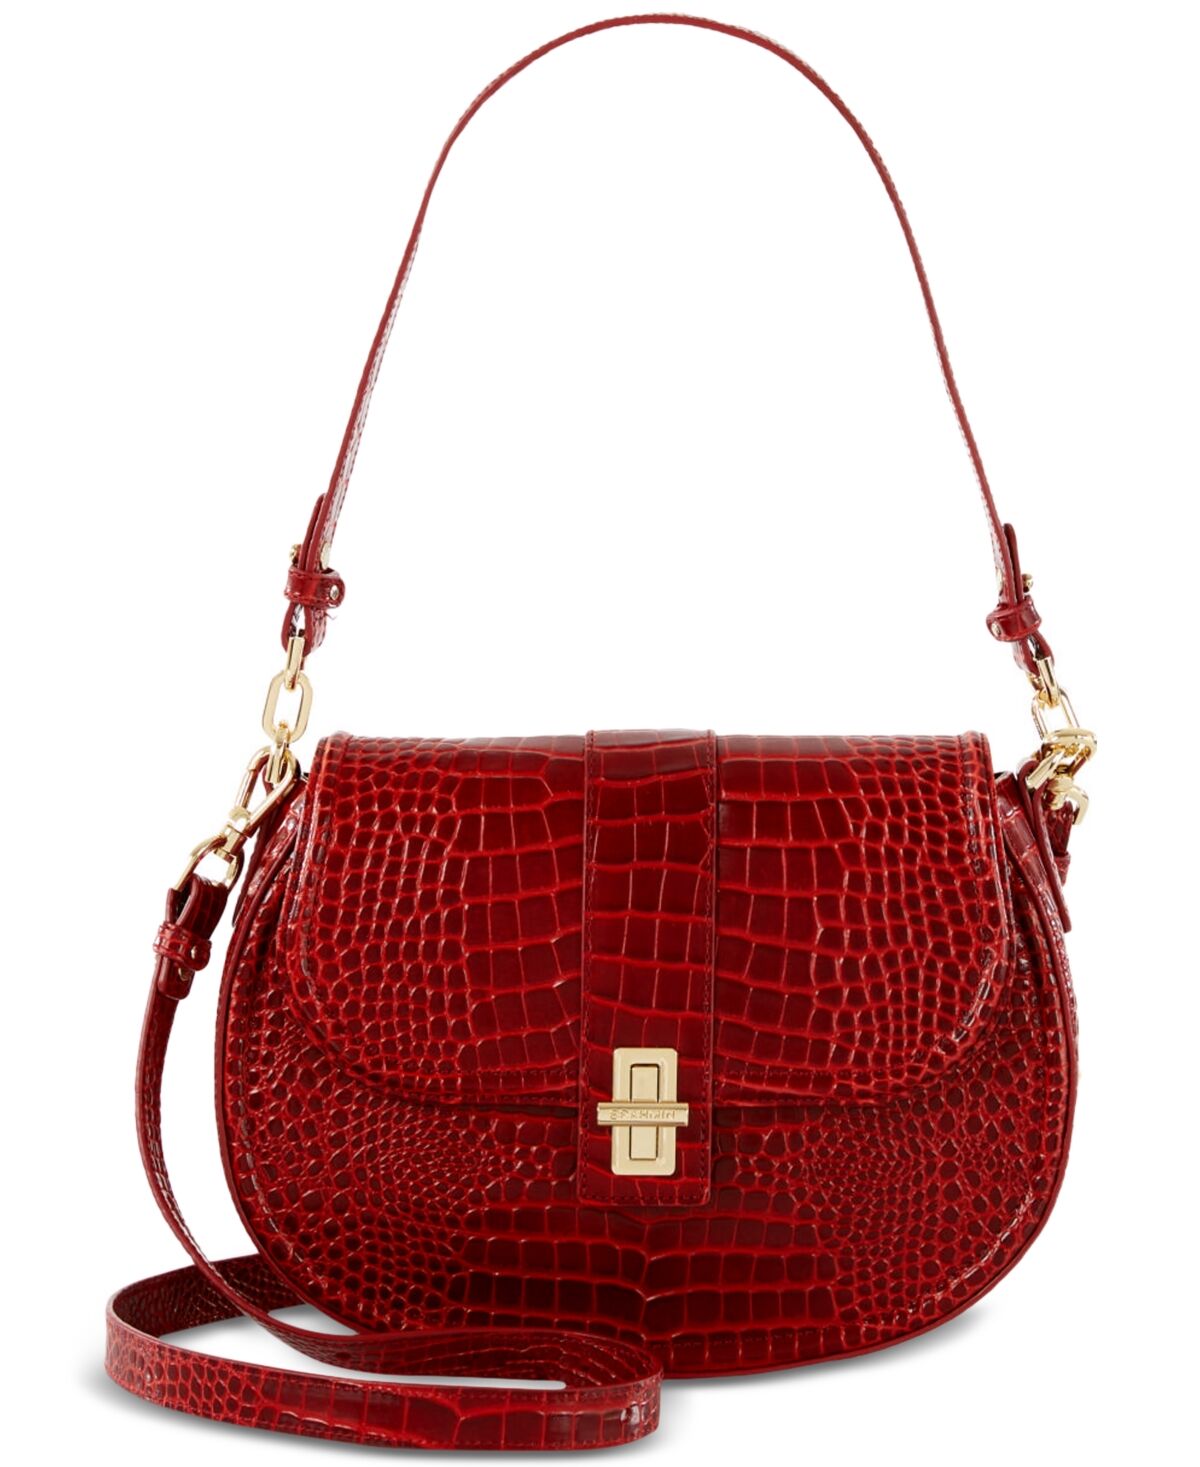 Brahmin Cynthia Glissandro Small Embossed Leather Shoulder Bag - Red